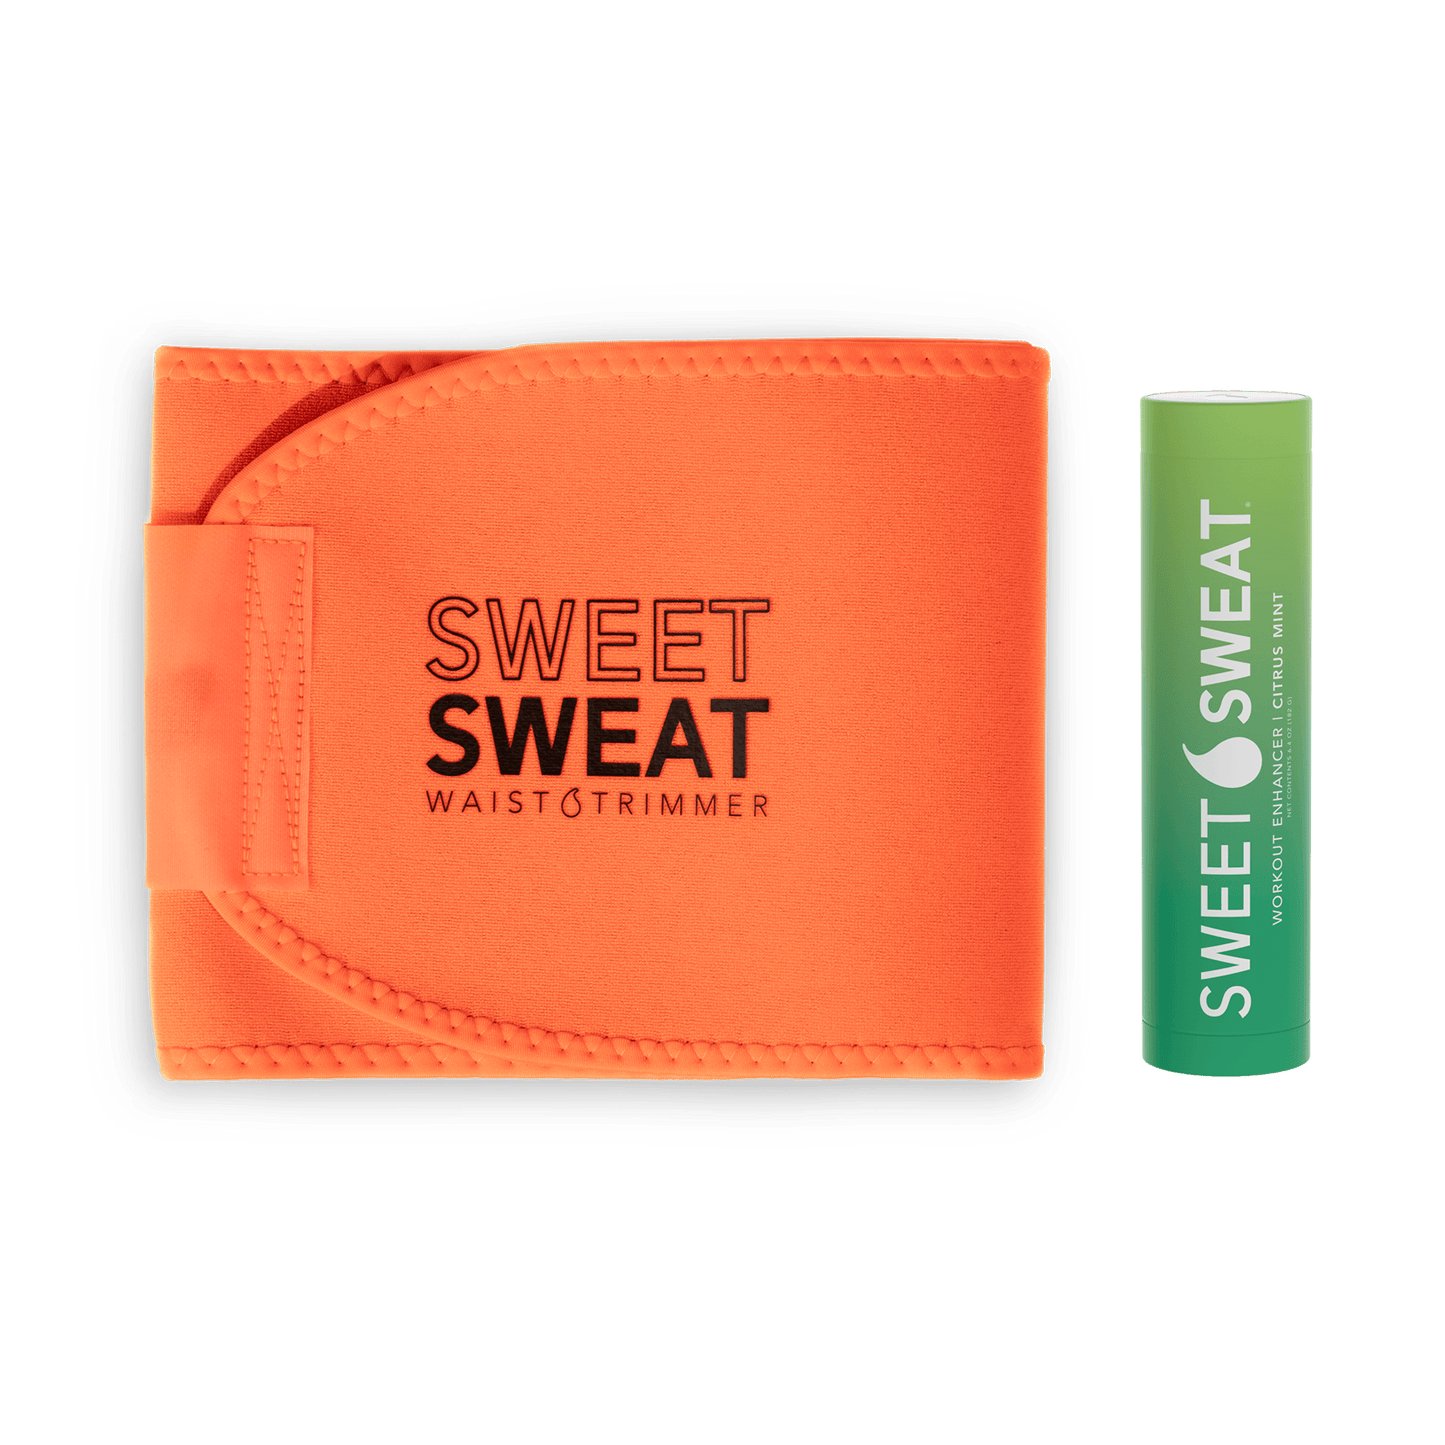 Sweet Sweat® Neon Sunset Bundle with Waist Trimmer and Sweet Sweat® Stick